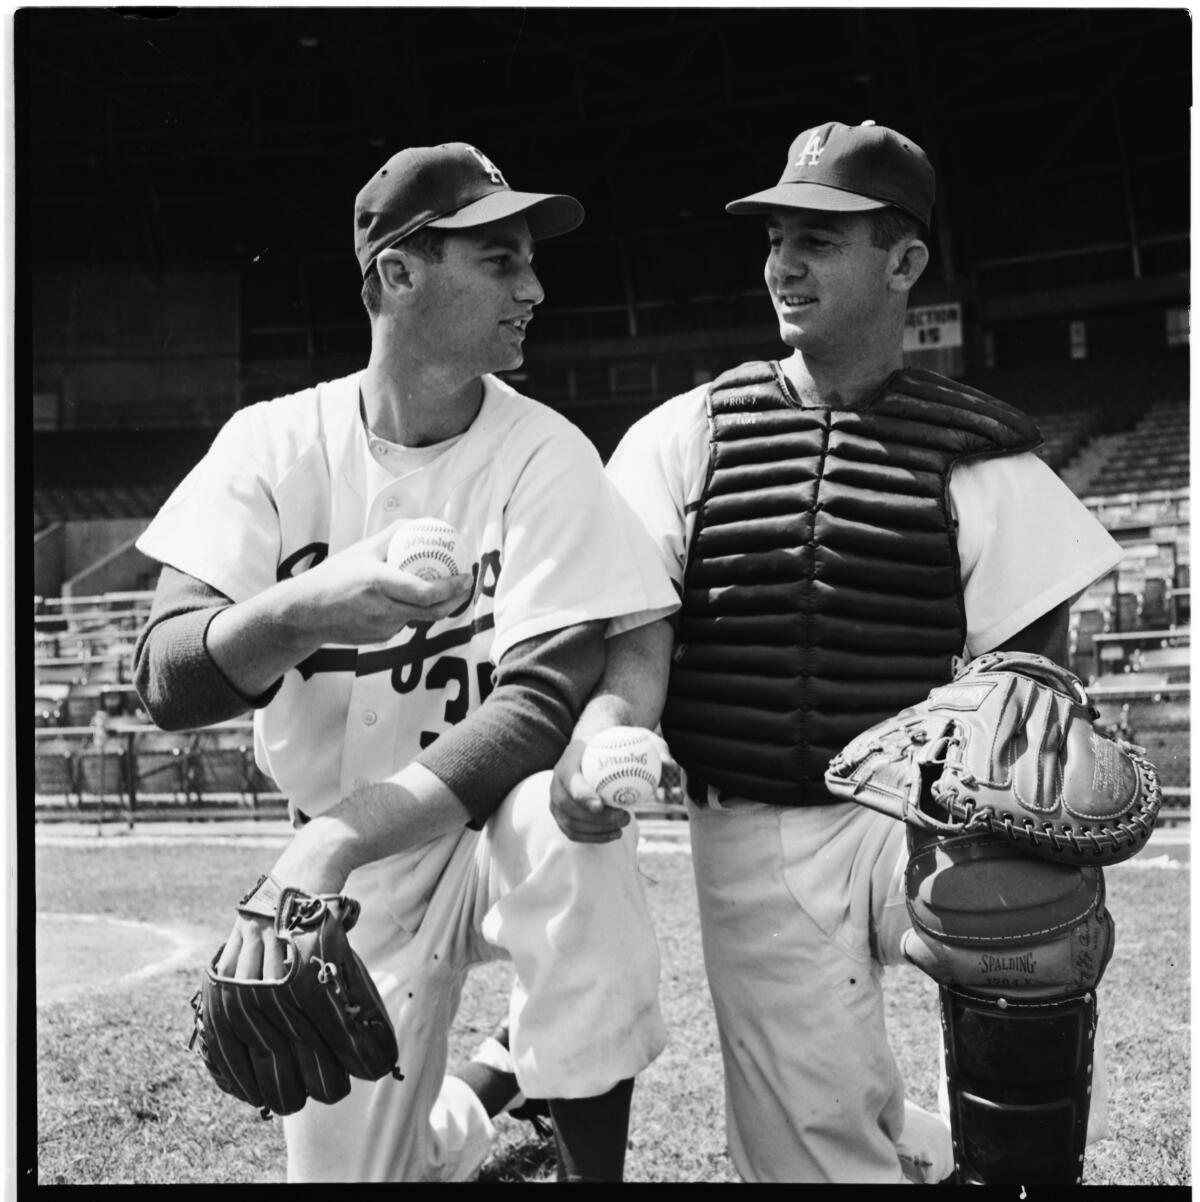 Norm Sherry, right, and his brother Larry in 1958.